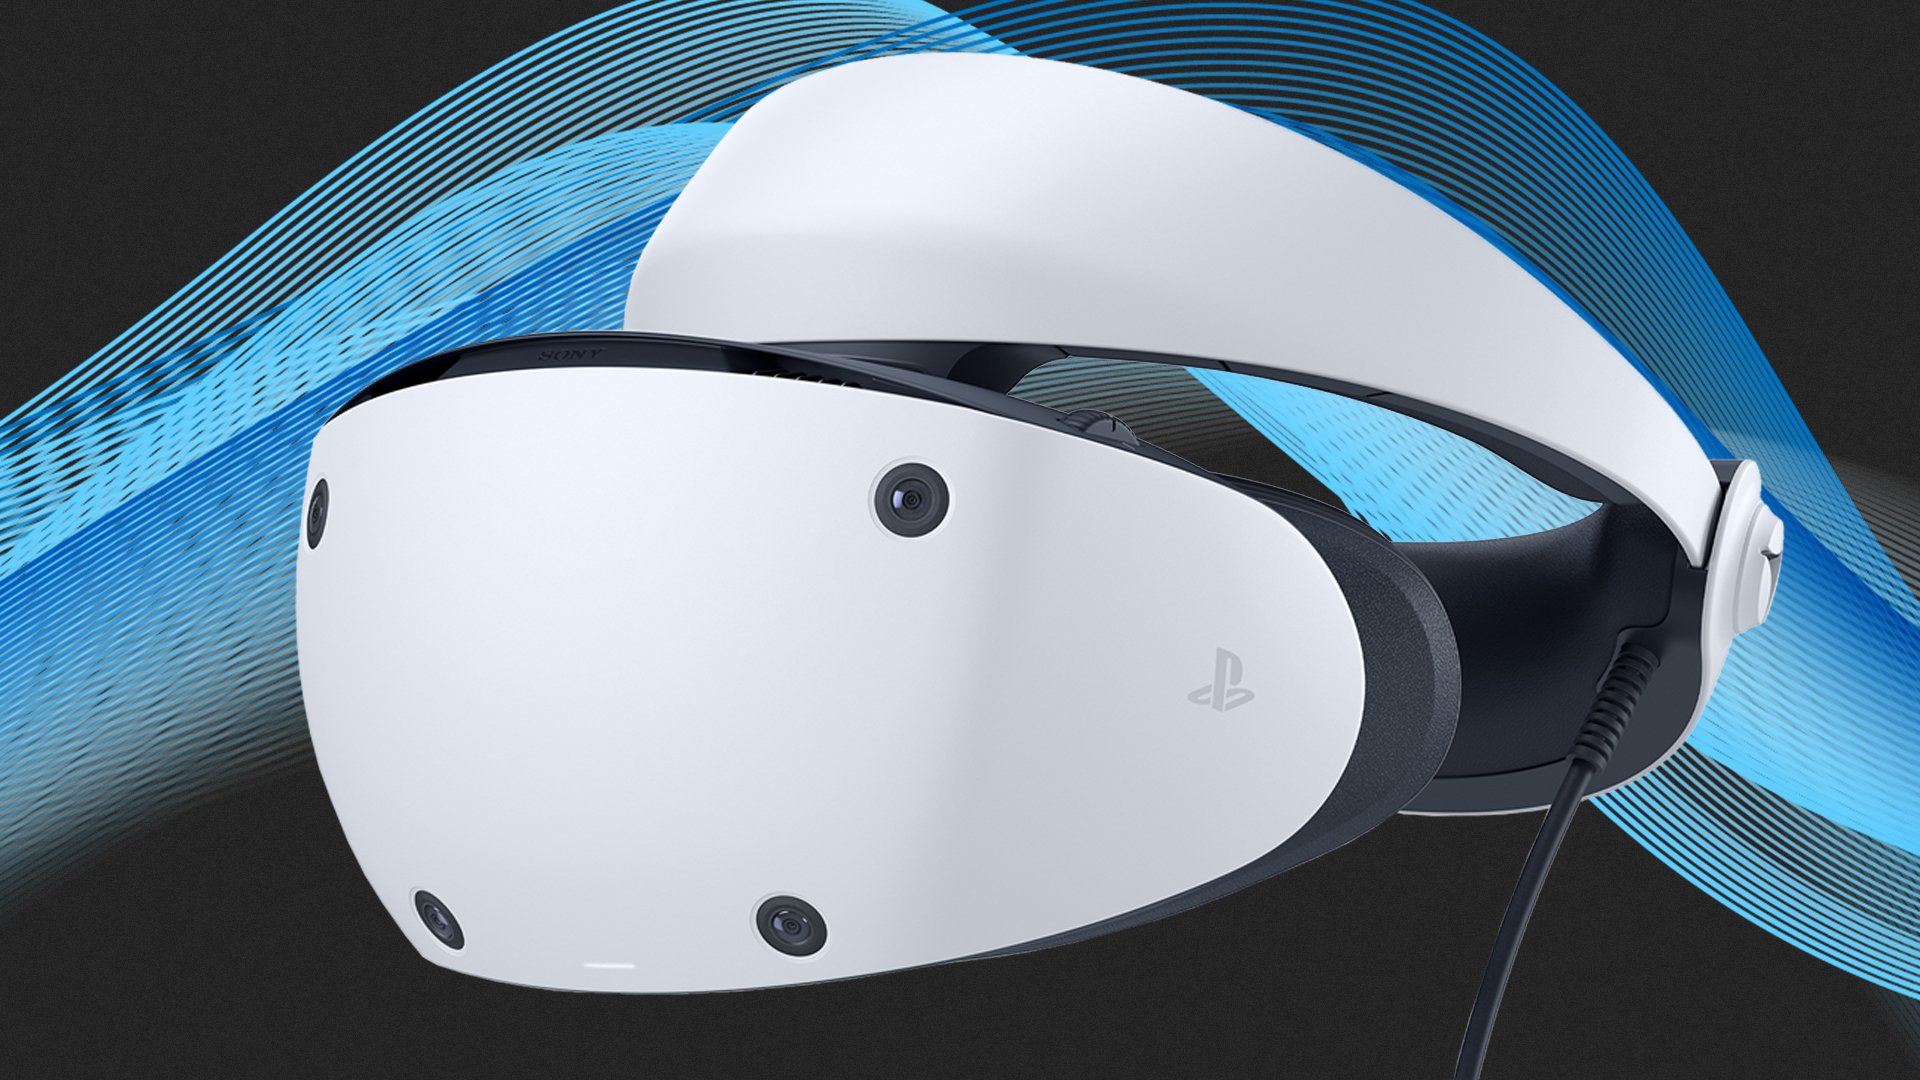 PlayStation details some of the functions of the PlayStation VR2 